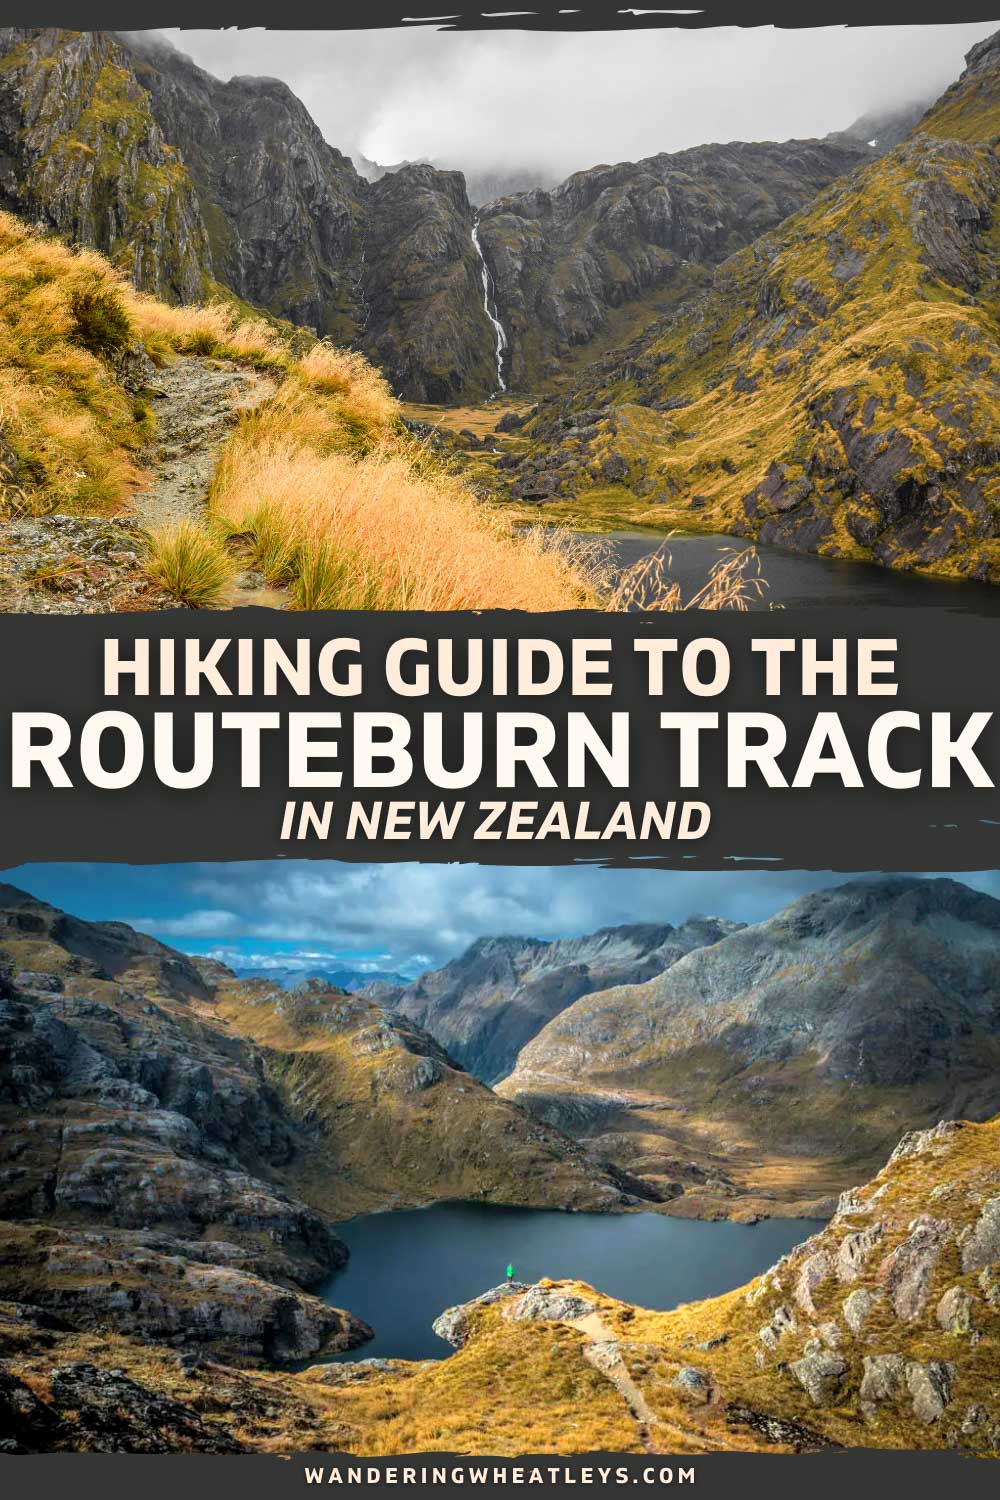 Guide to Hiking The Routeburn Track, New Zealand